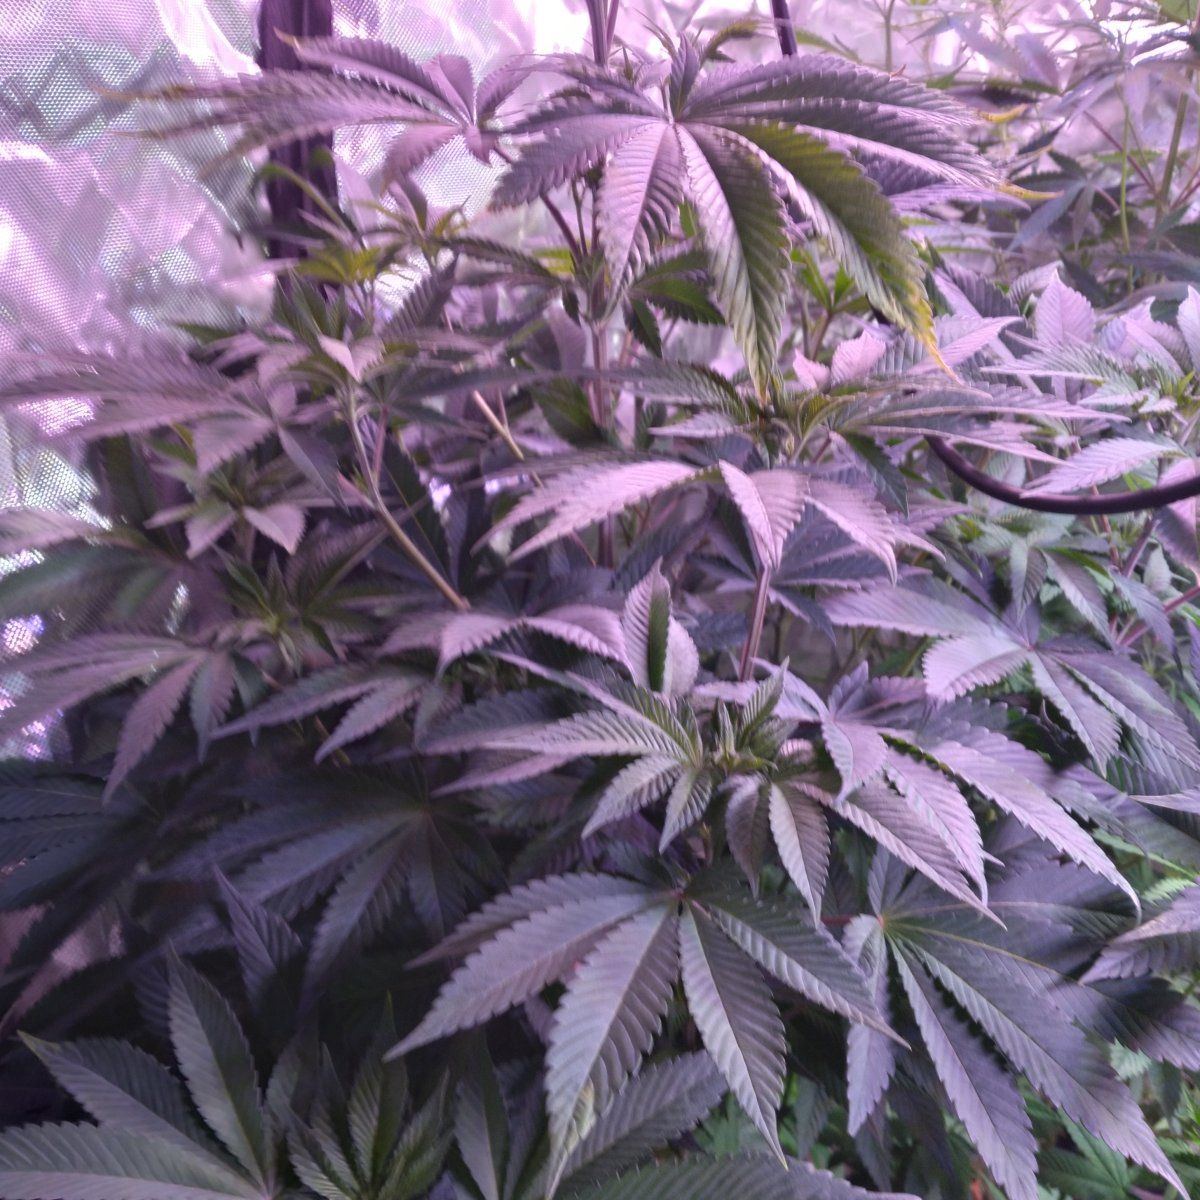 Never had any problems with growing till now 6